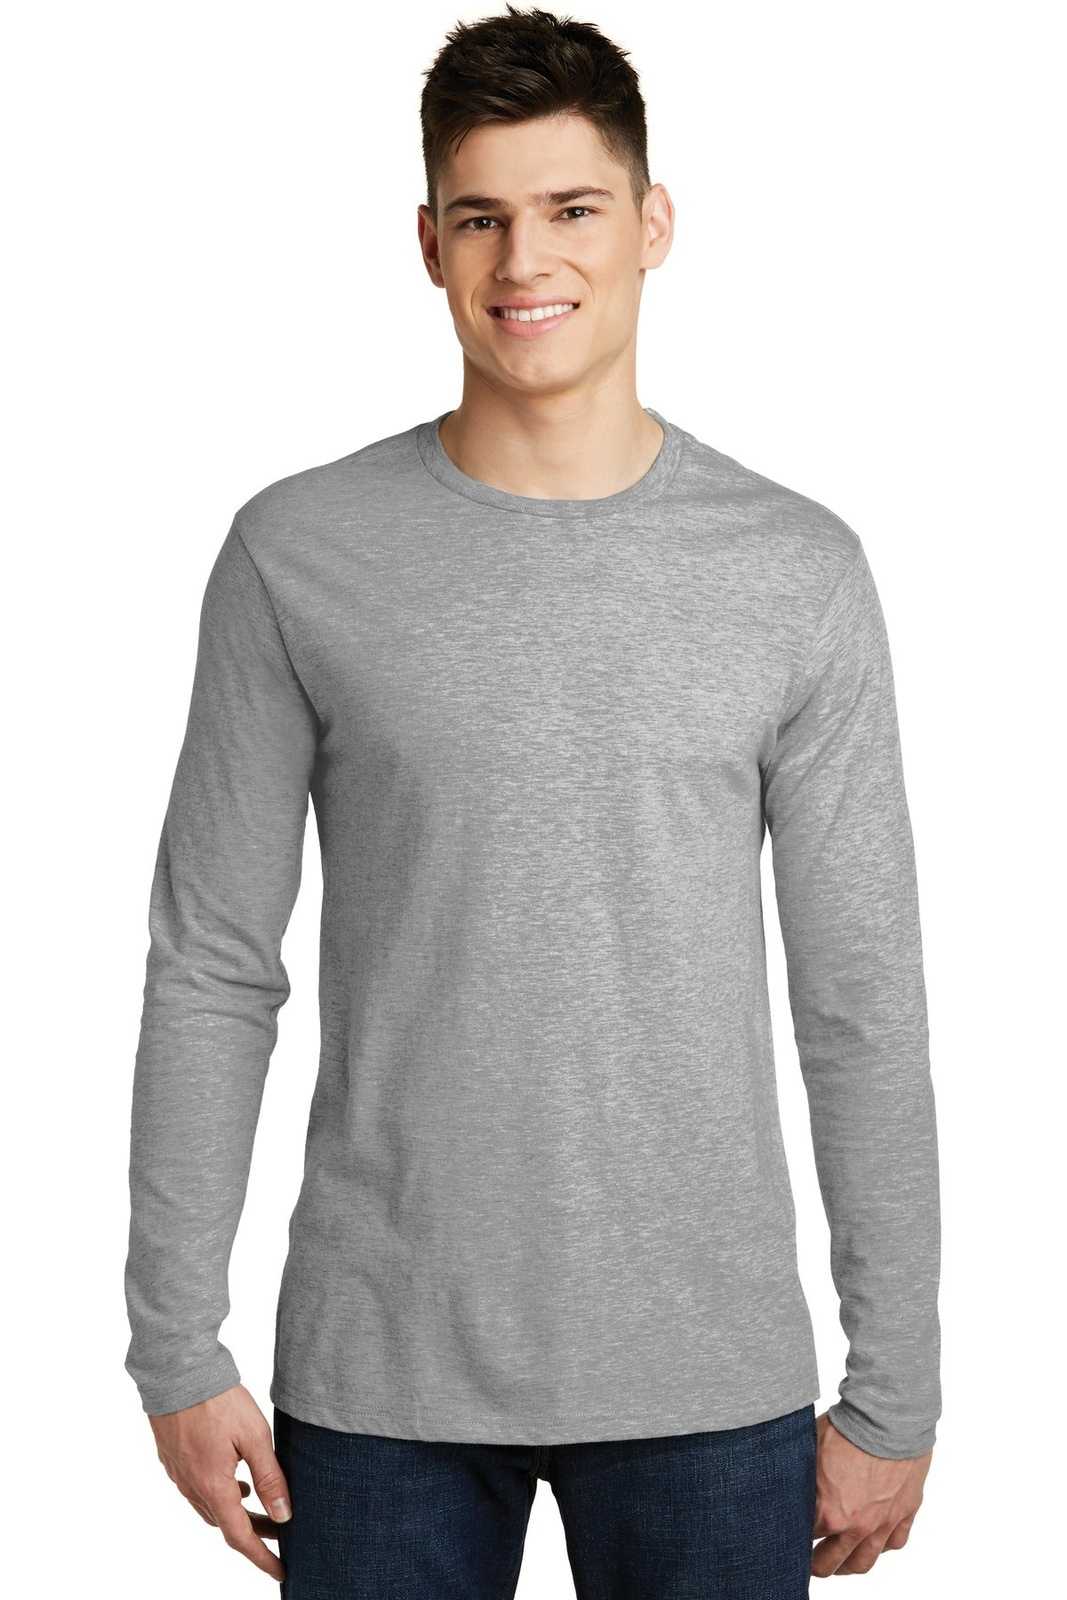 District DT6200 Very Important Tee Long Sleeve - Light Heather Gray - HIT a Double - 1